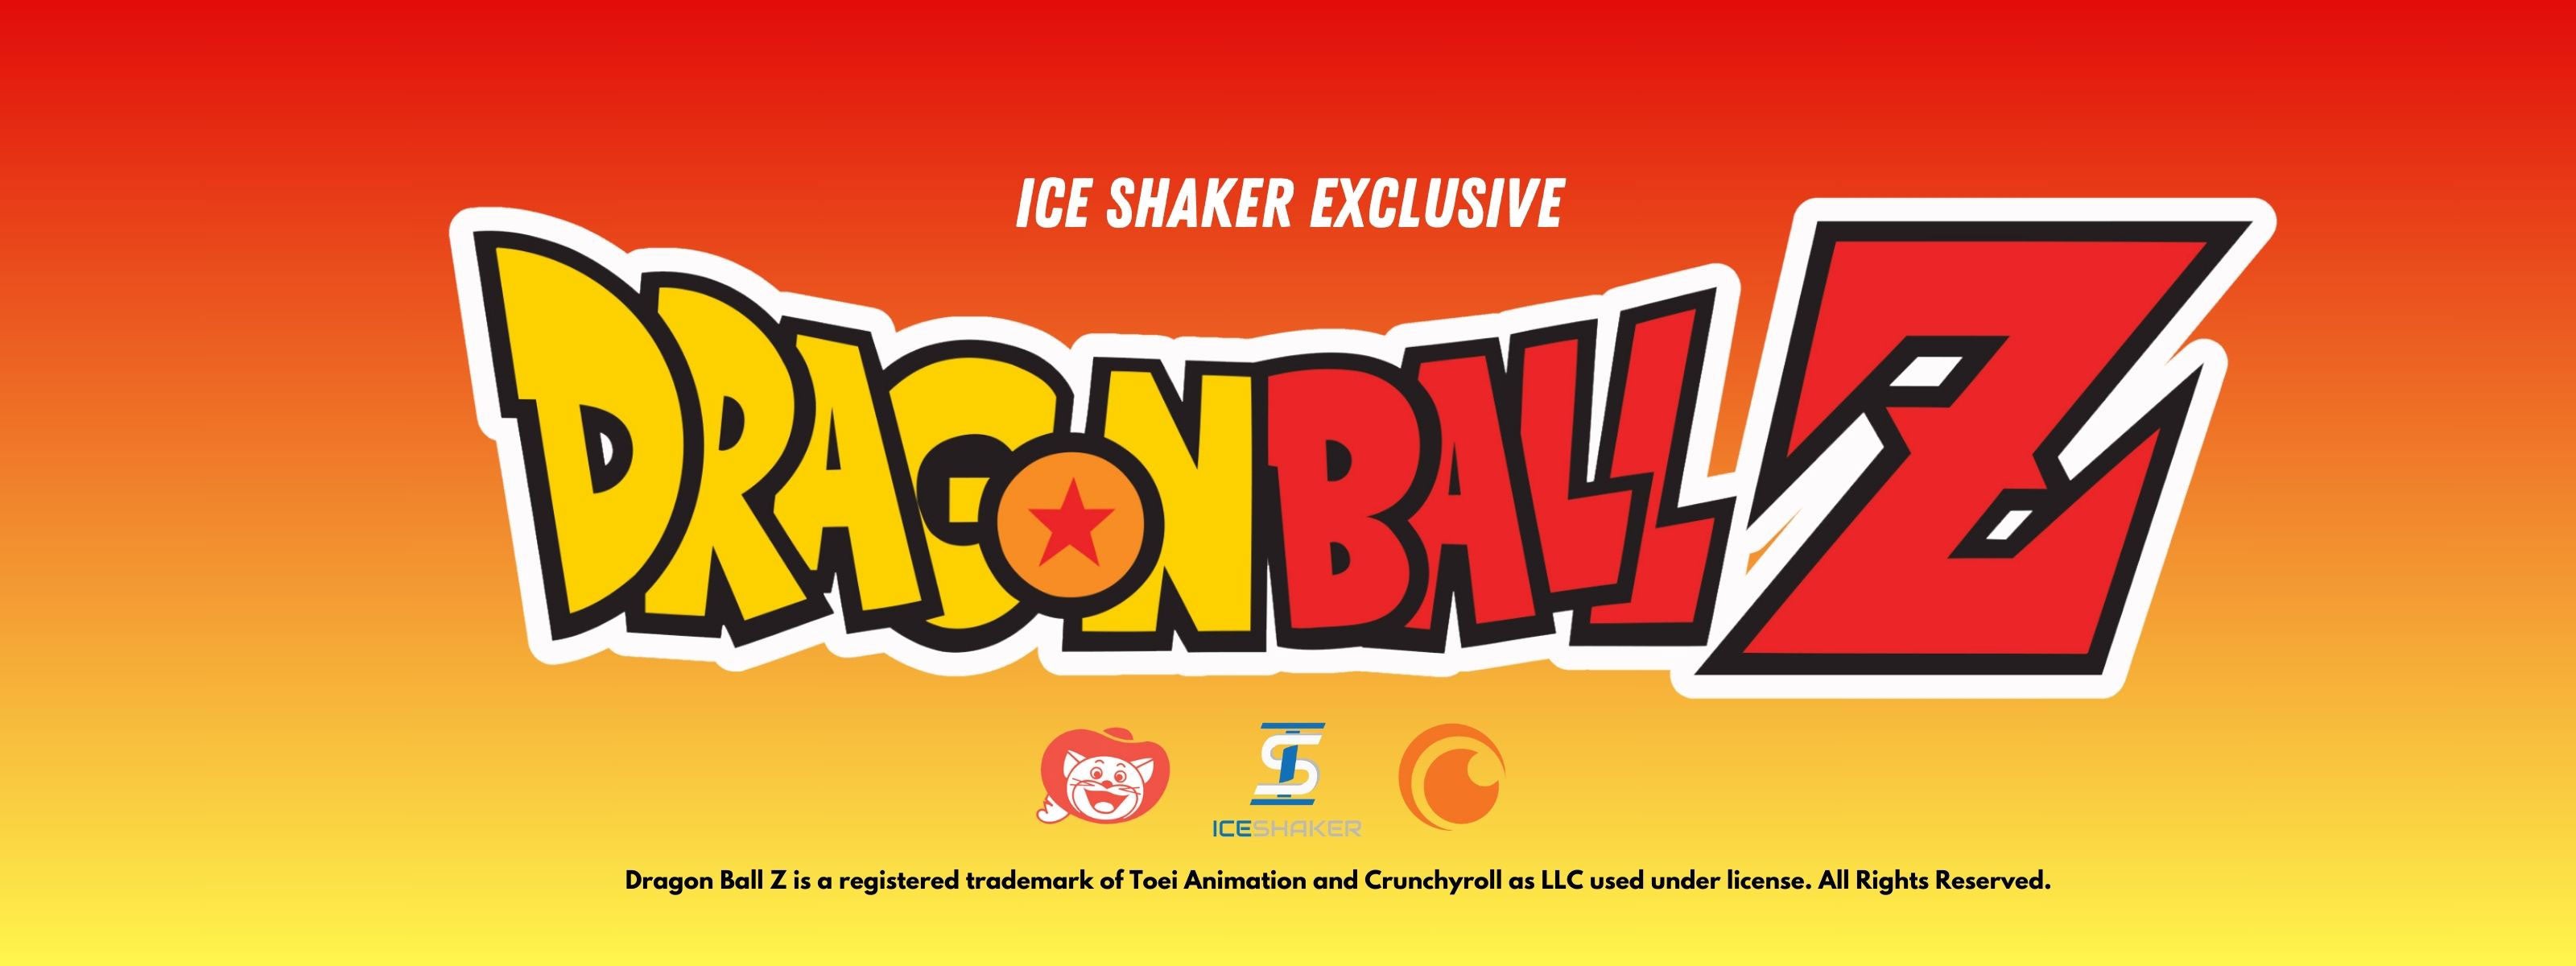 Iceshaker.com Exclusive. Dragon Ball Z is a registered trademark of Toei Animation and Crunchyroll as LLC used under license. All Rights Reserved.